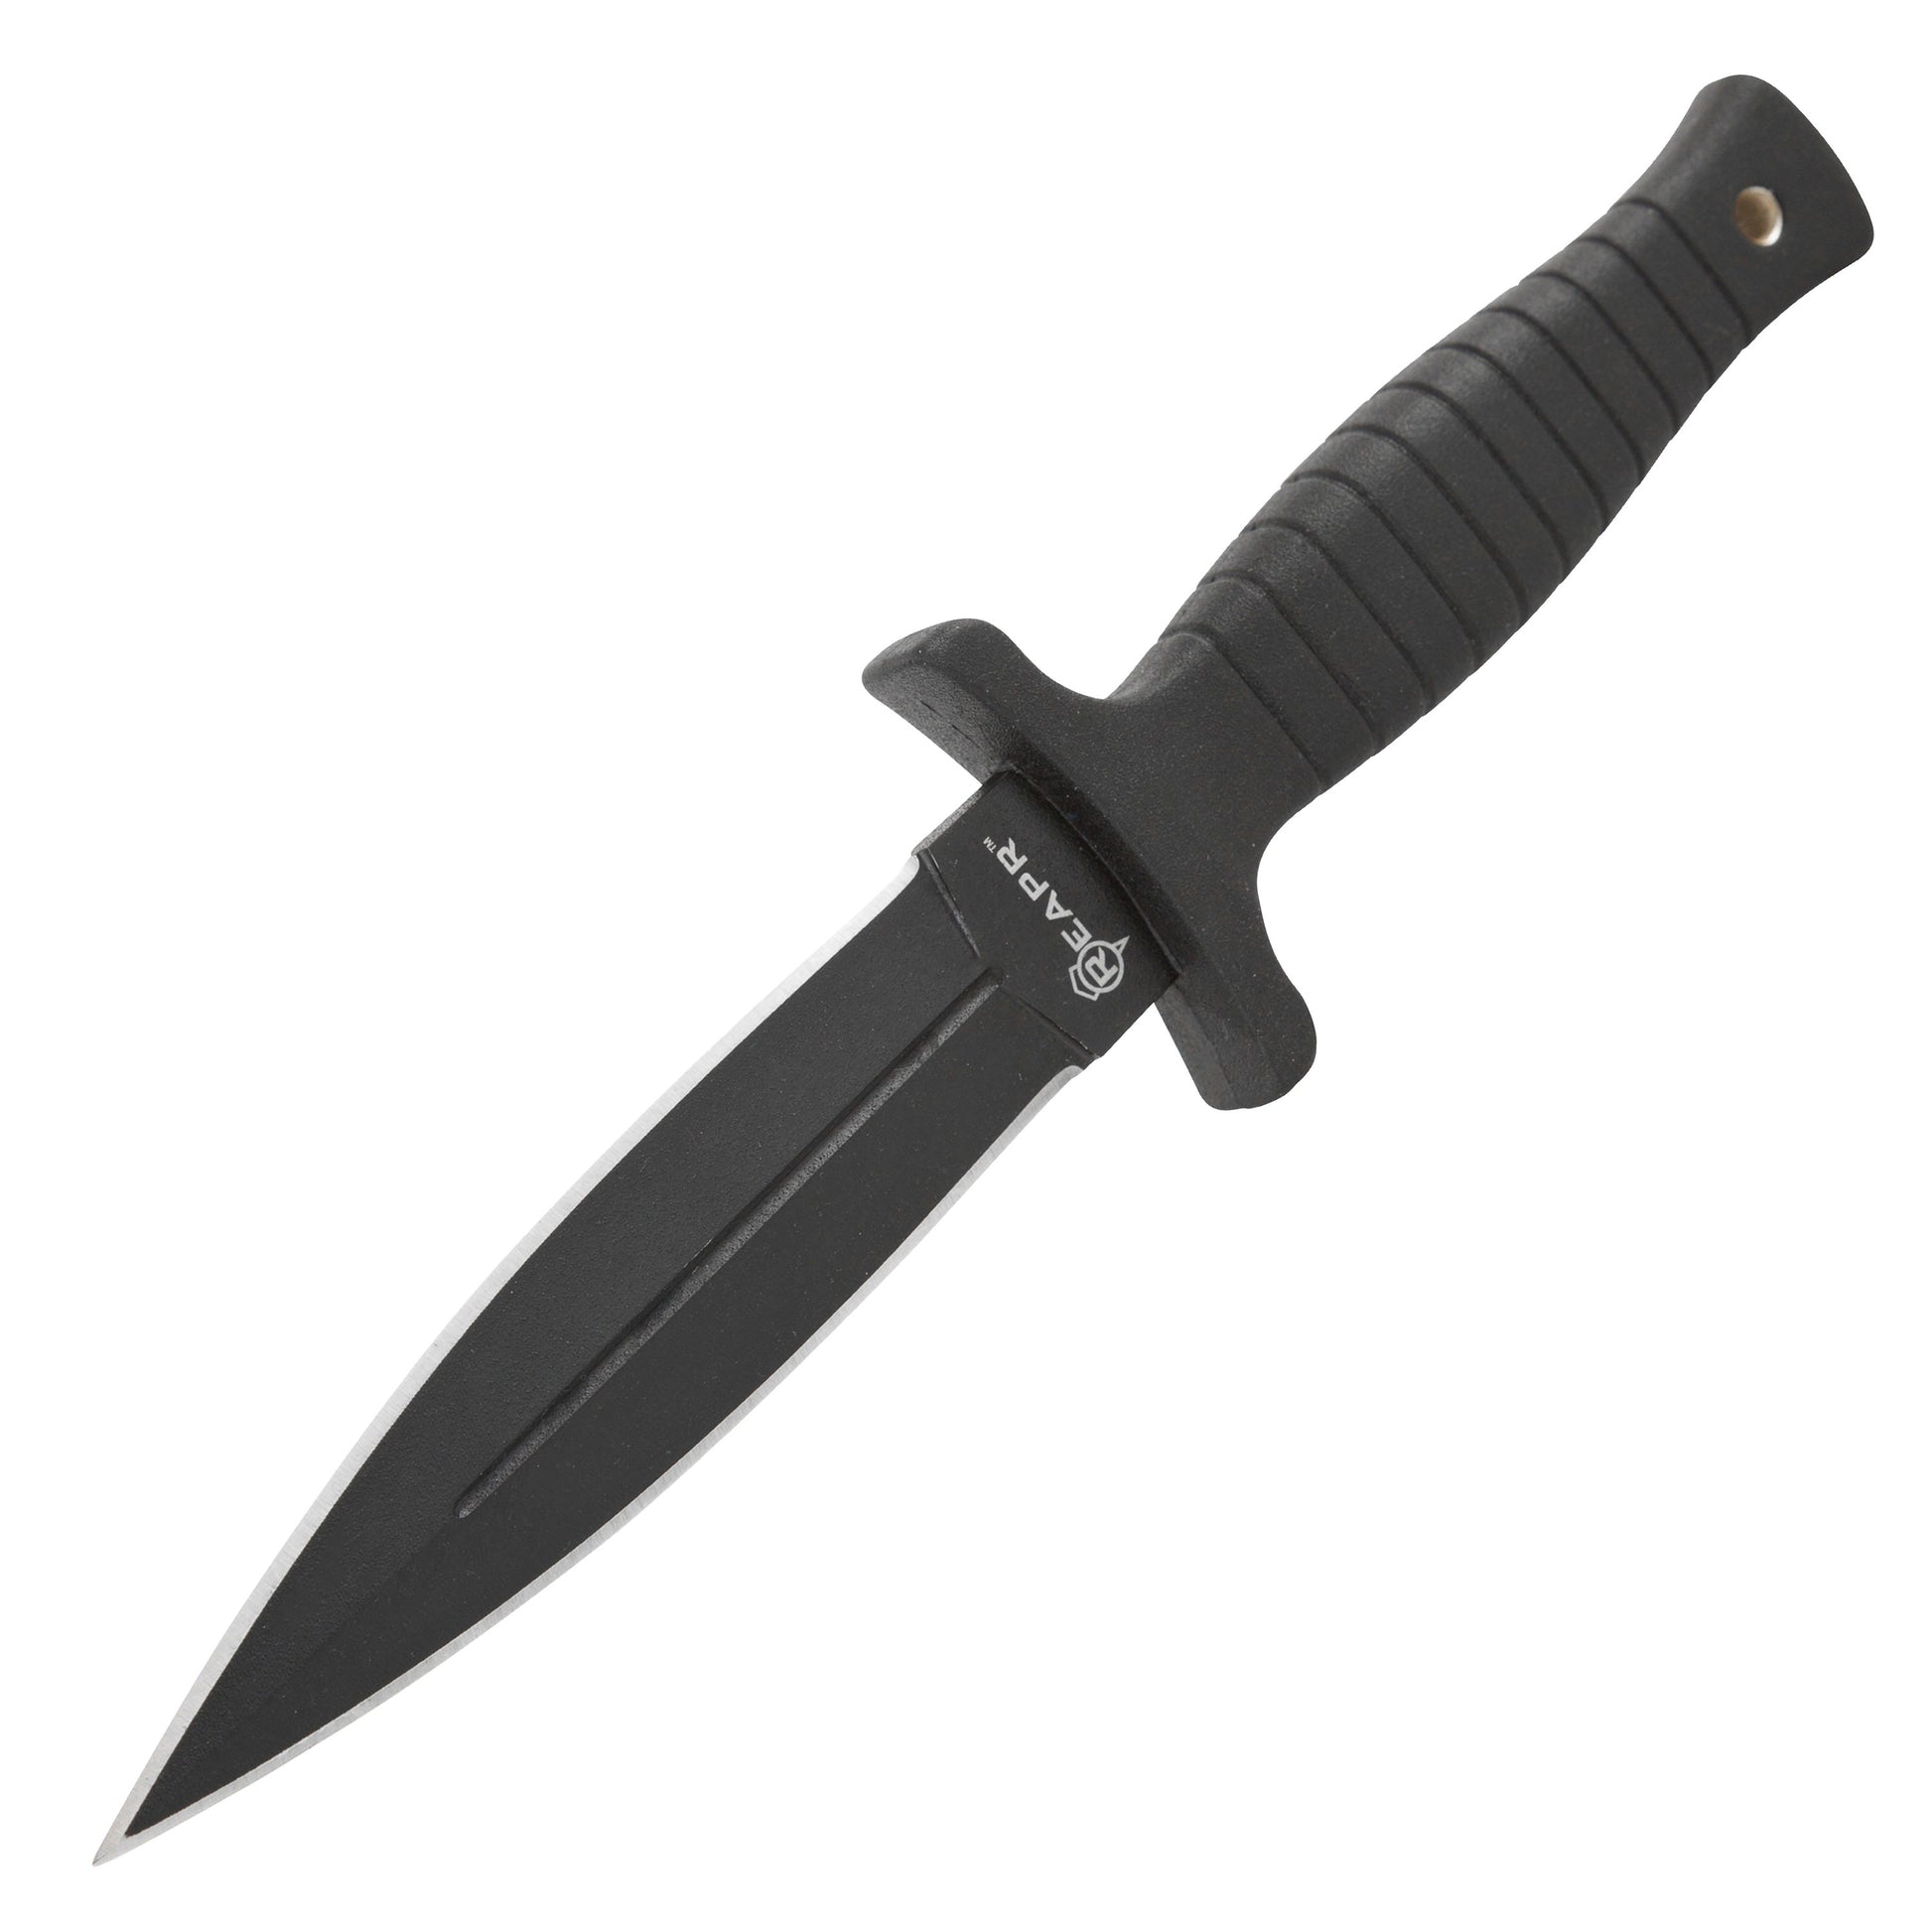 Reapr 11002 TAC boot knife with a molded scabbard, allowing for boot, belt, or over-the-shoulder transport